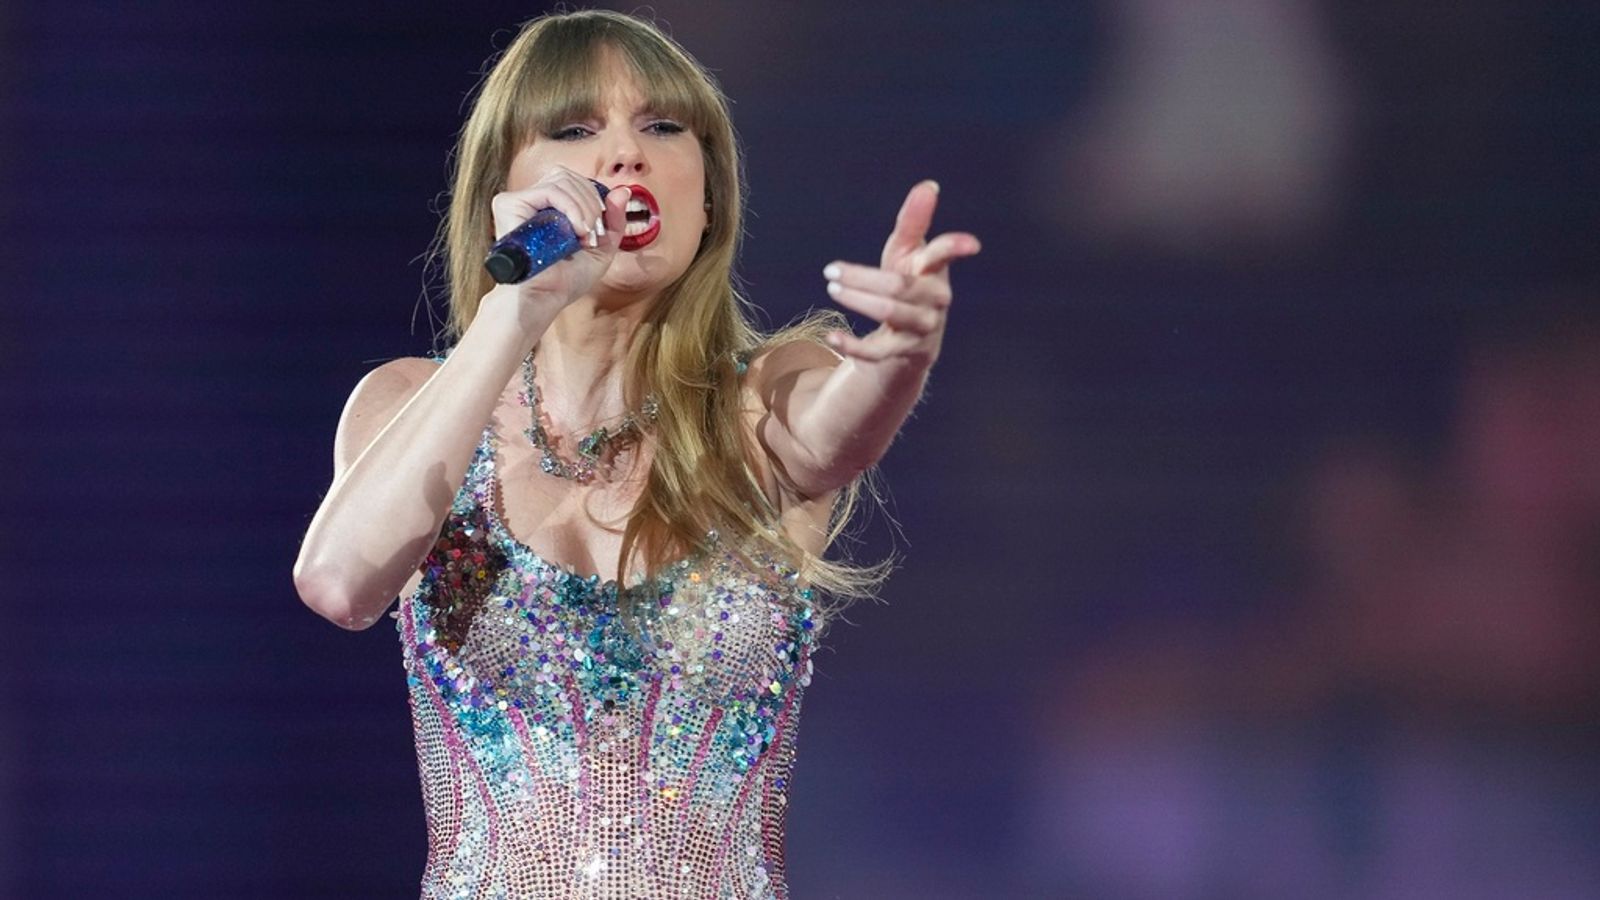 Taylor Swift Eras tour course offered by college for parents and carers